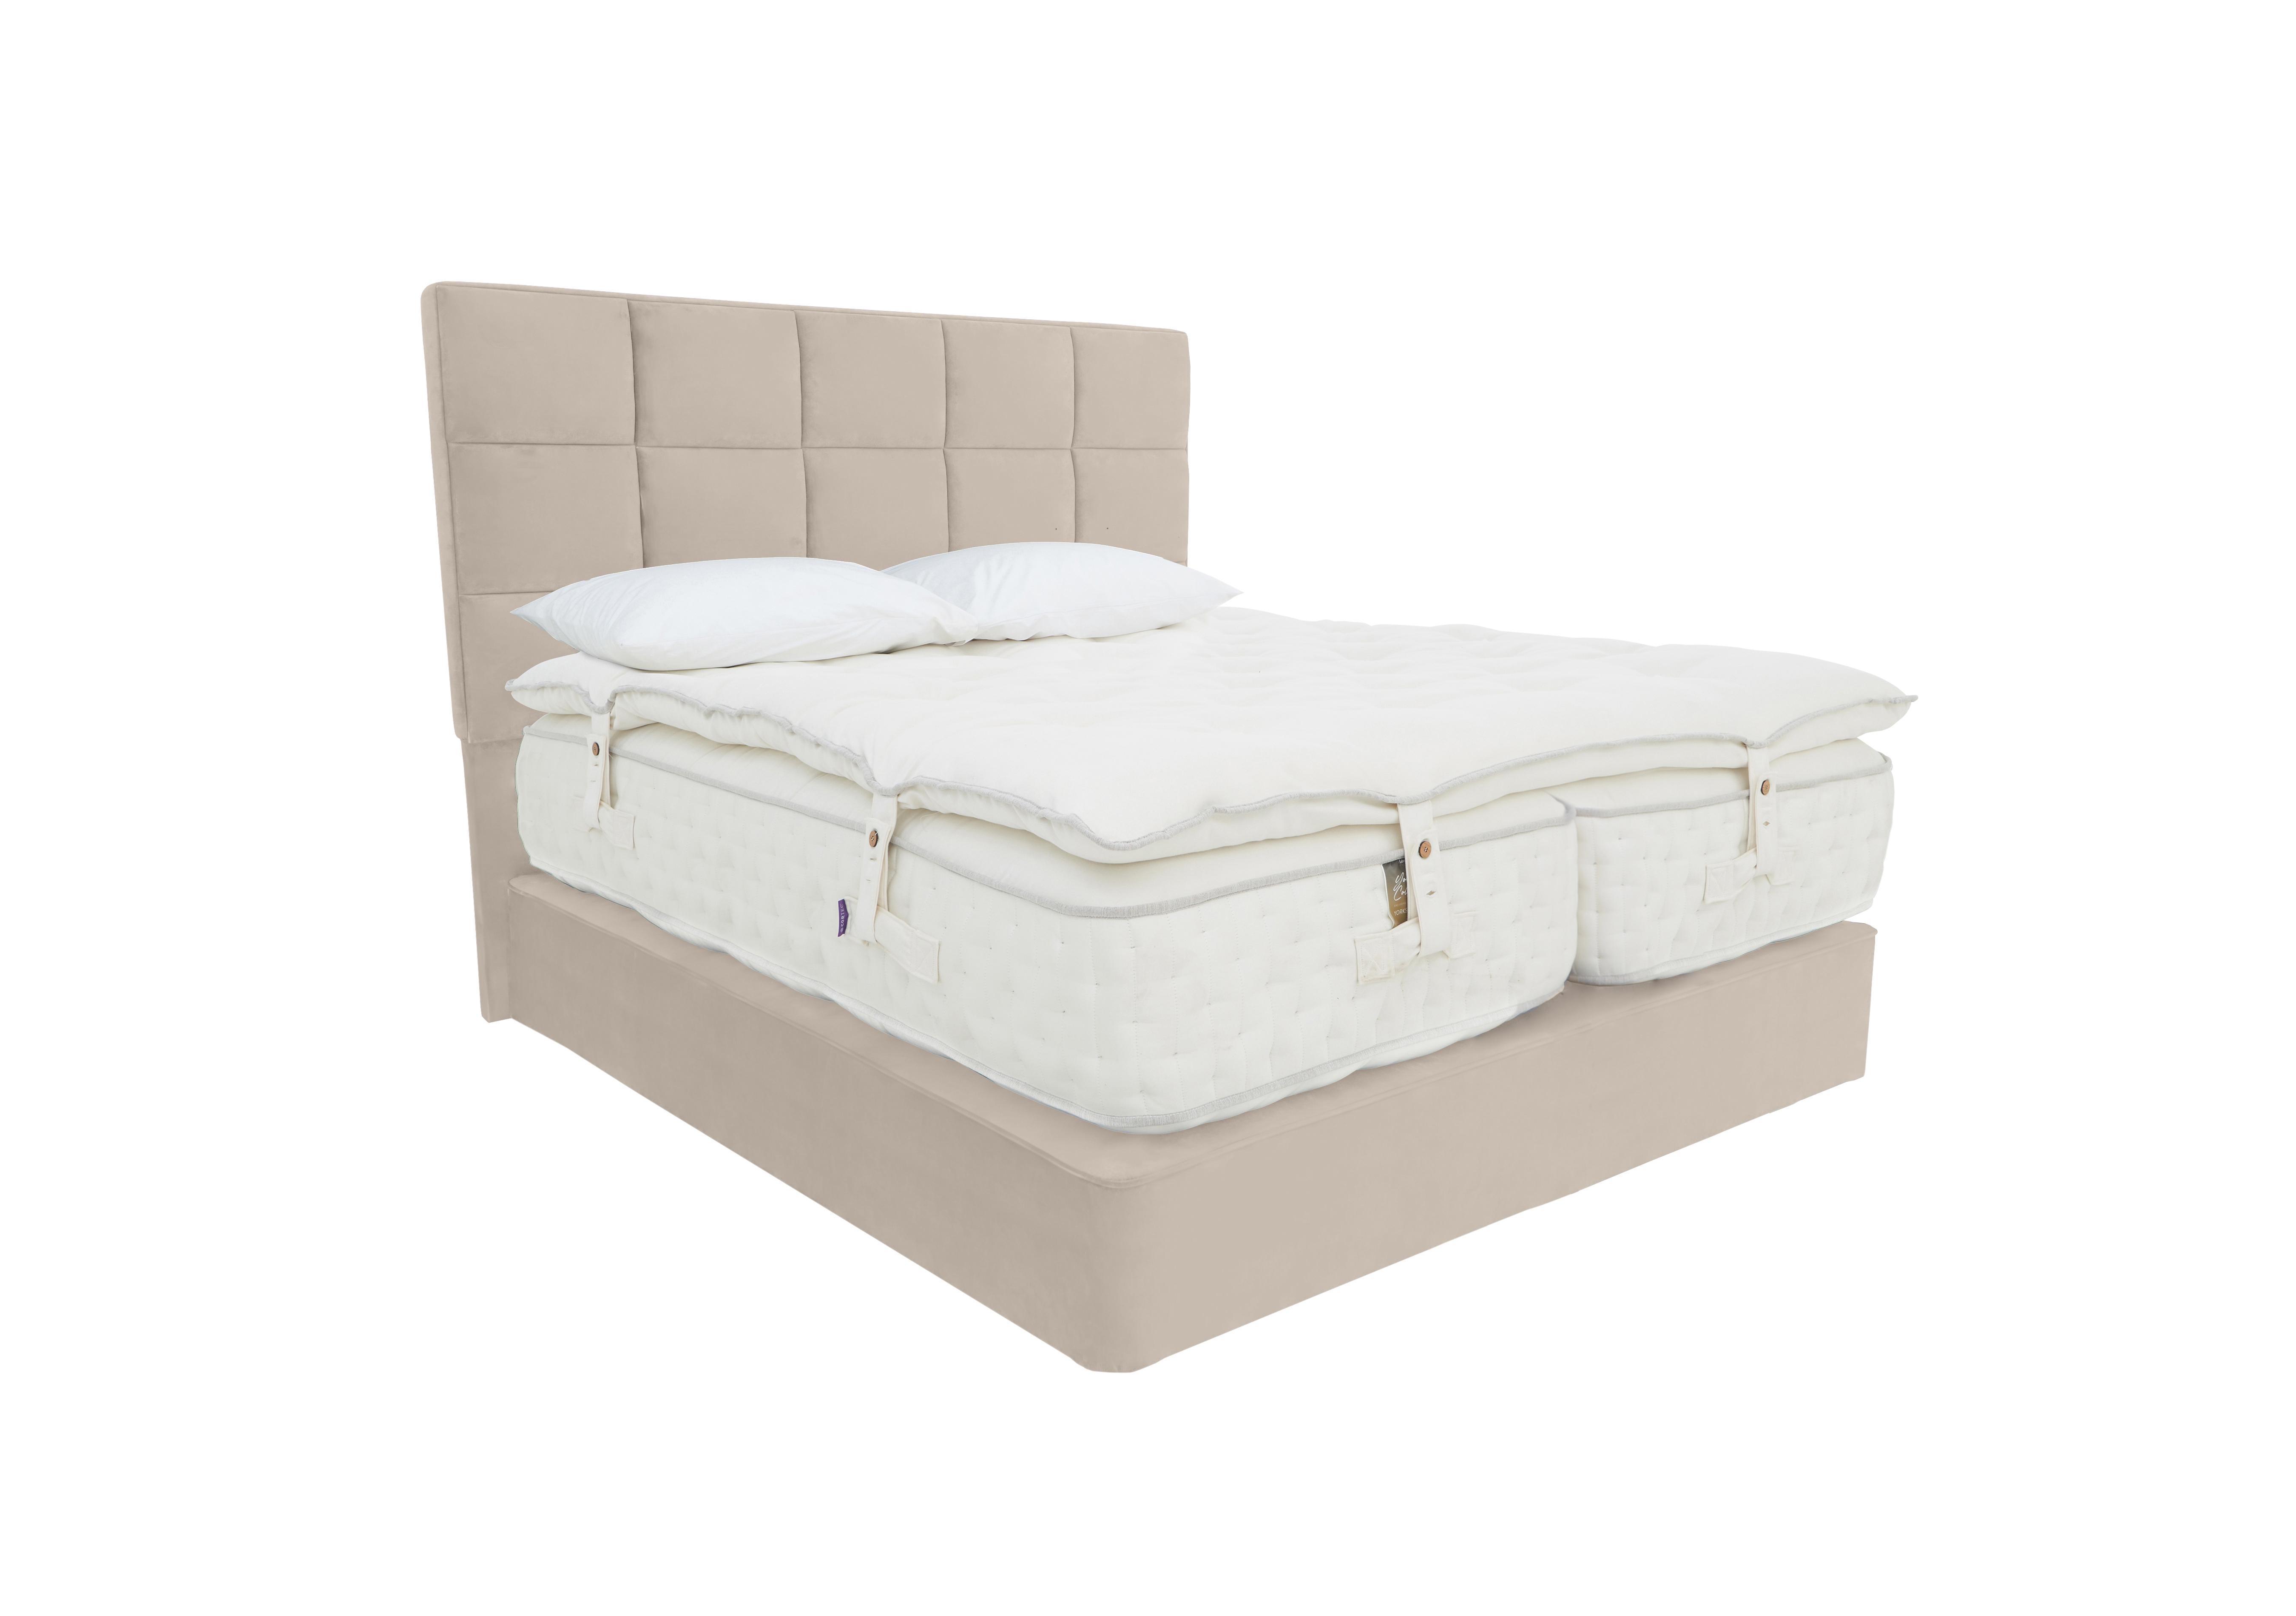 Yorkshire 30K Divan Set with Zip and Link Mattress with Mattress Topper in Seven Ivory on Furniture Village